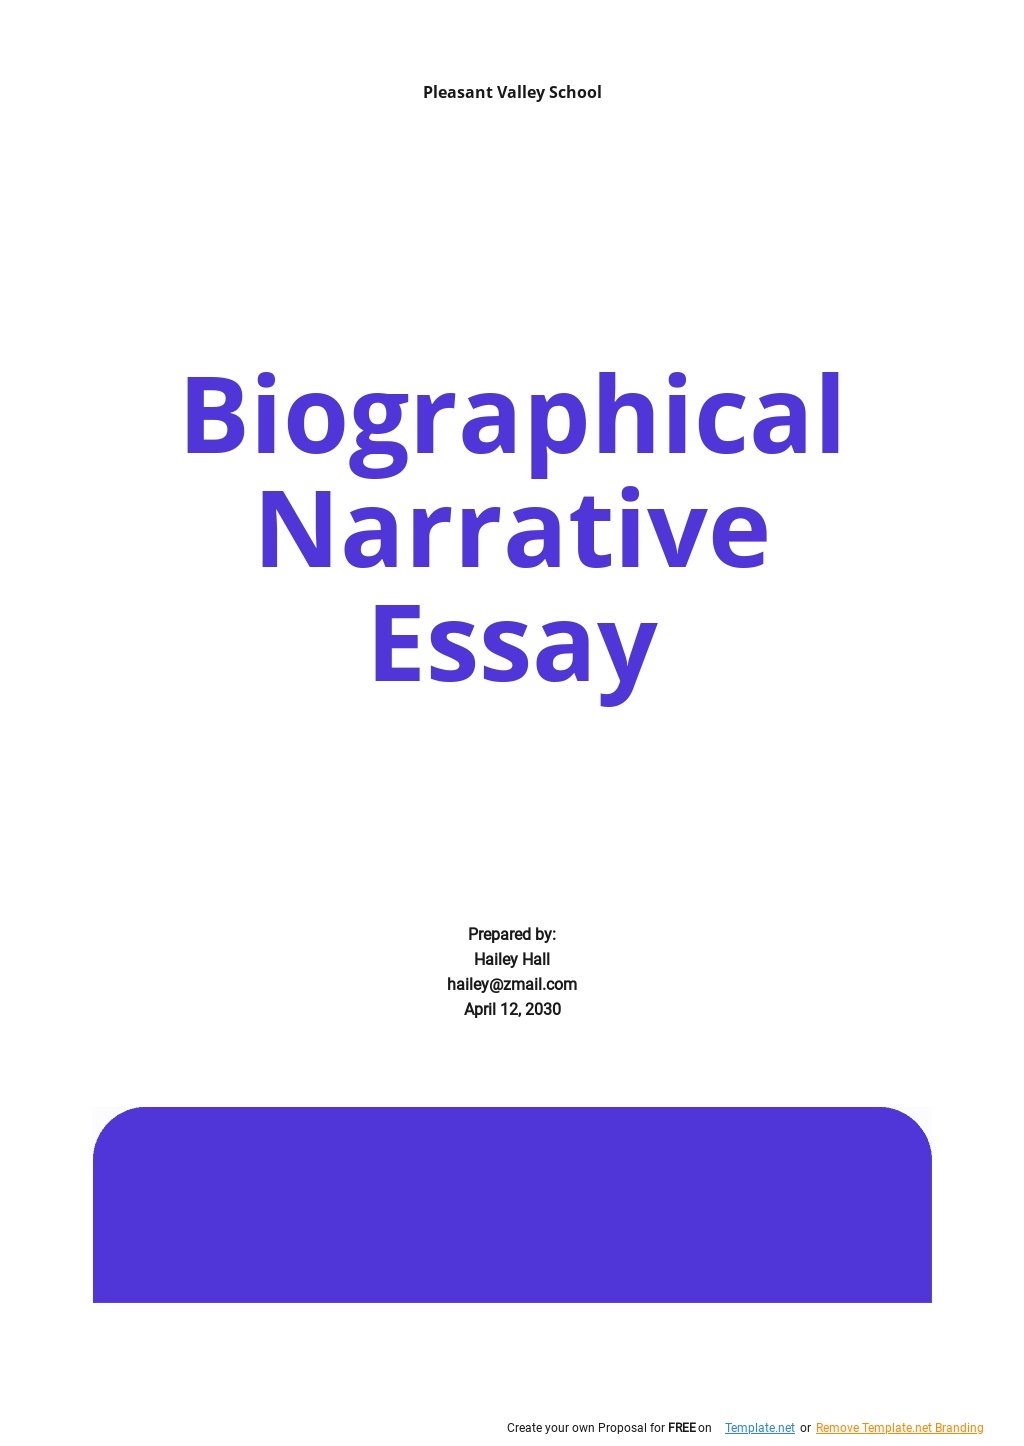 Biographical Narrative Essay Template in Word, Google Docs, Apple Pages